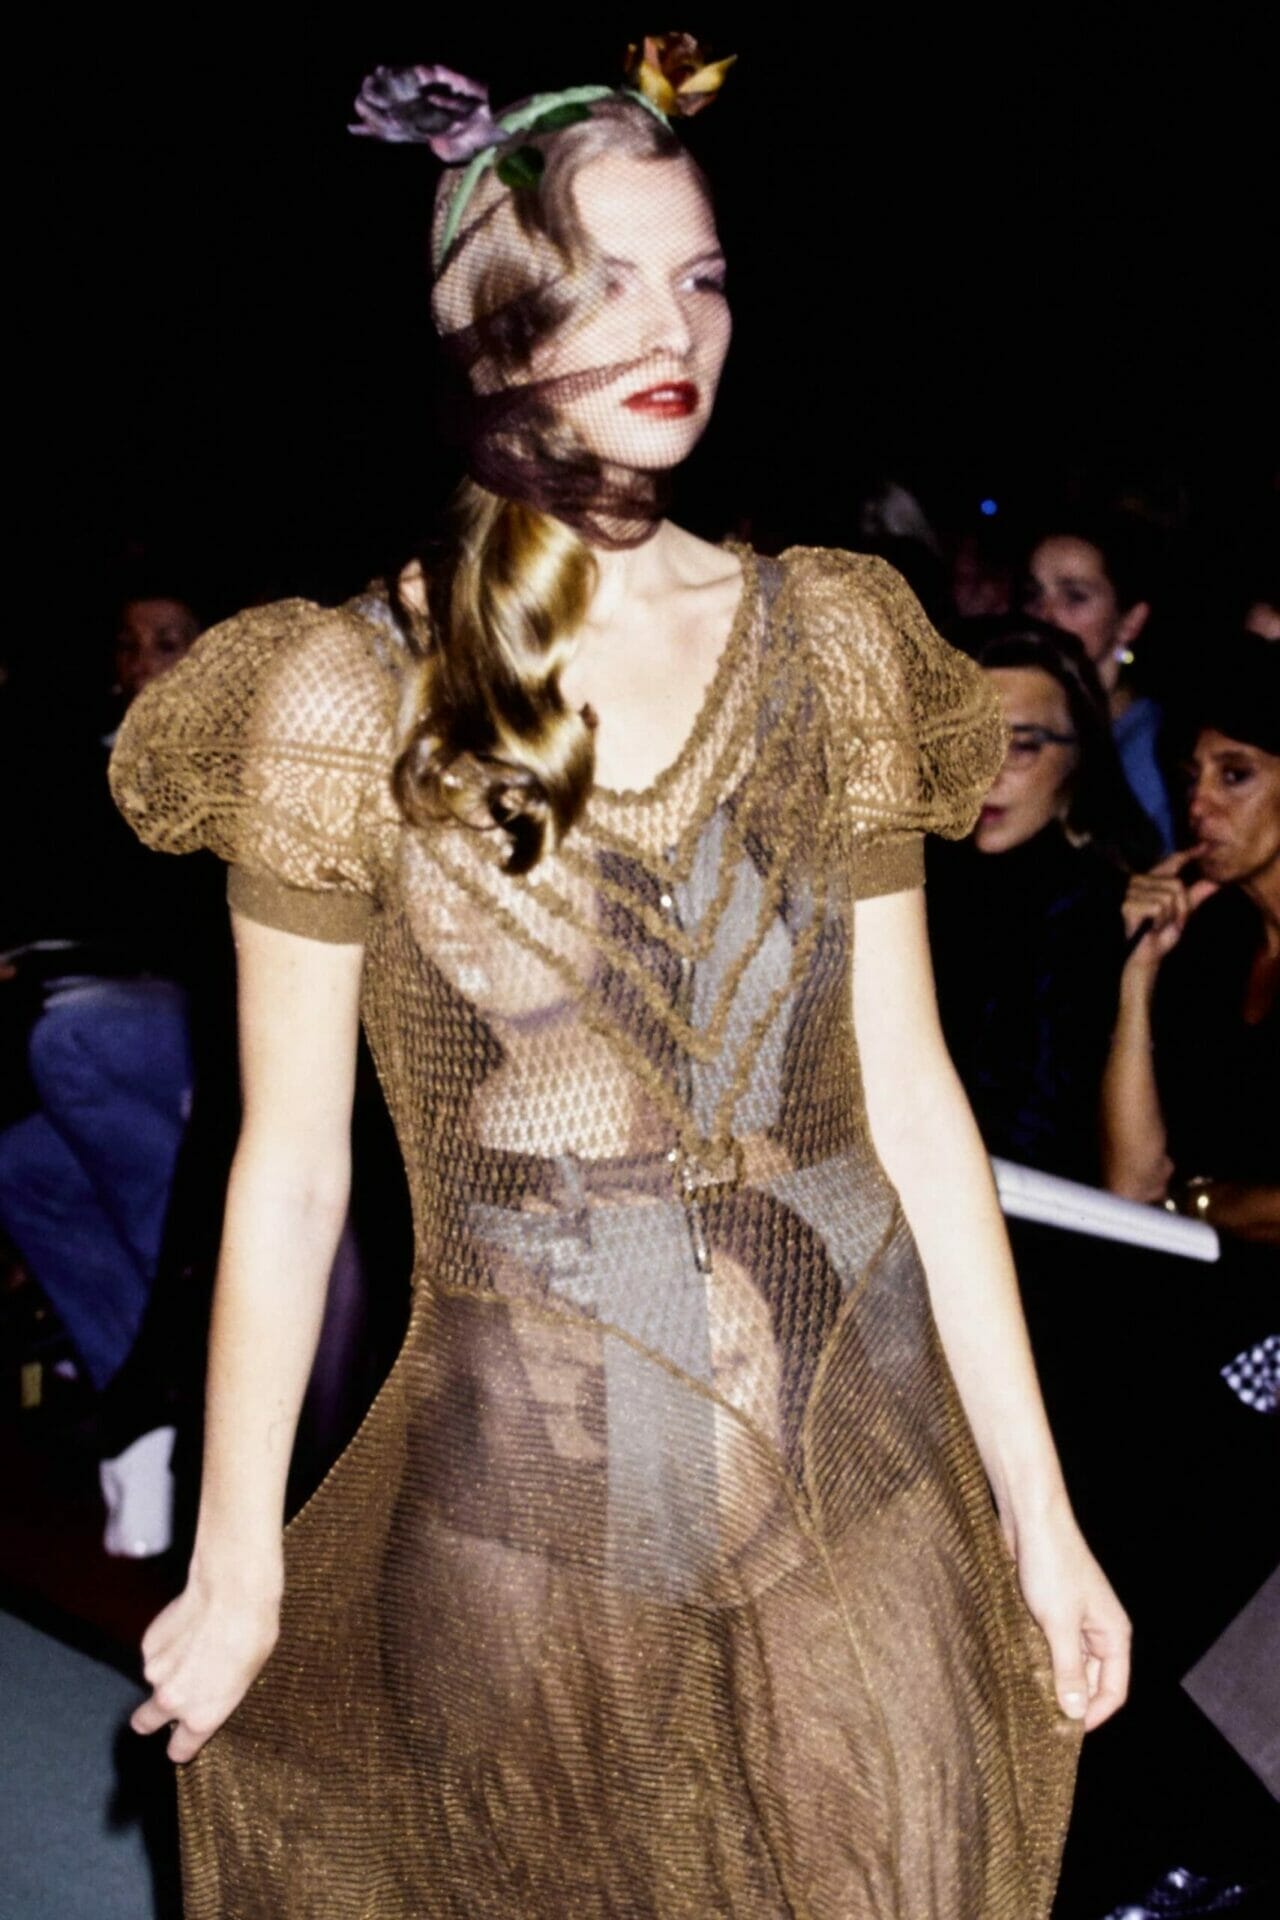 JEAN PAUL GAULTIER READY-TO-WEAR SPRING-SUMMER 1995. RUNWAY MAGAZINE ® Collections Special Selection “Fashion Treasure”. RUNWAY MAGAZINE ® Collections. RUNWAY NOW / RUNWAY NEW